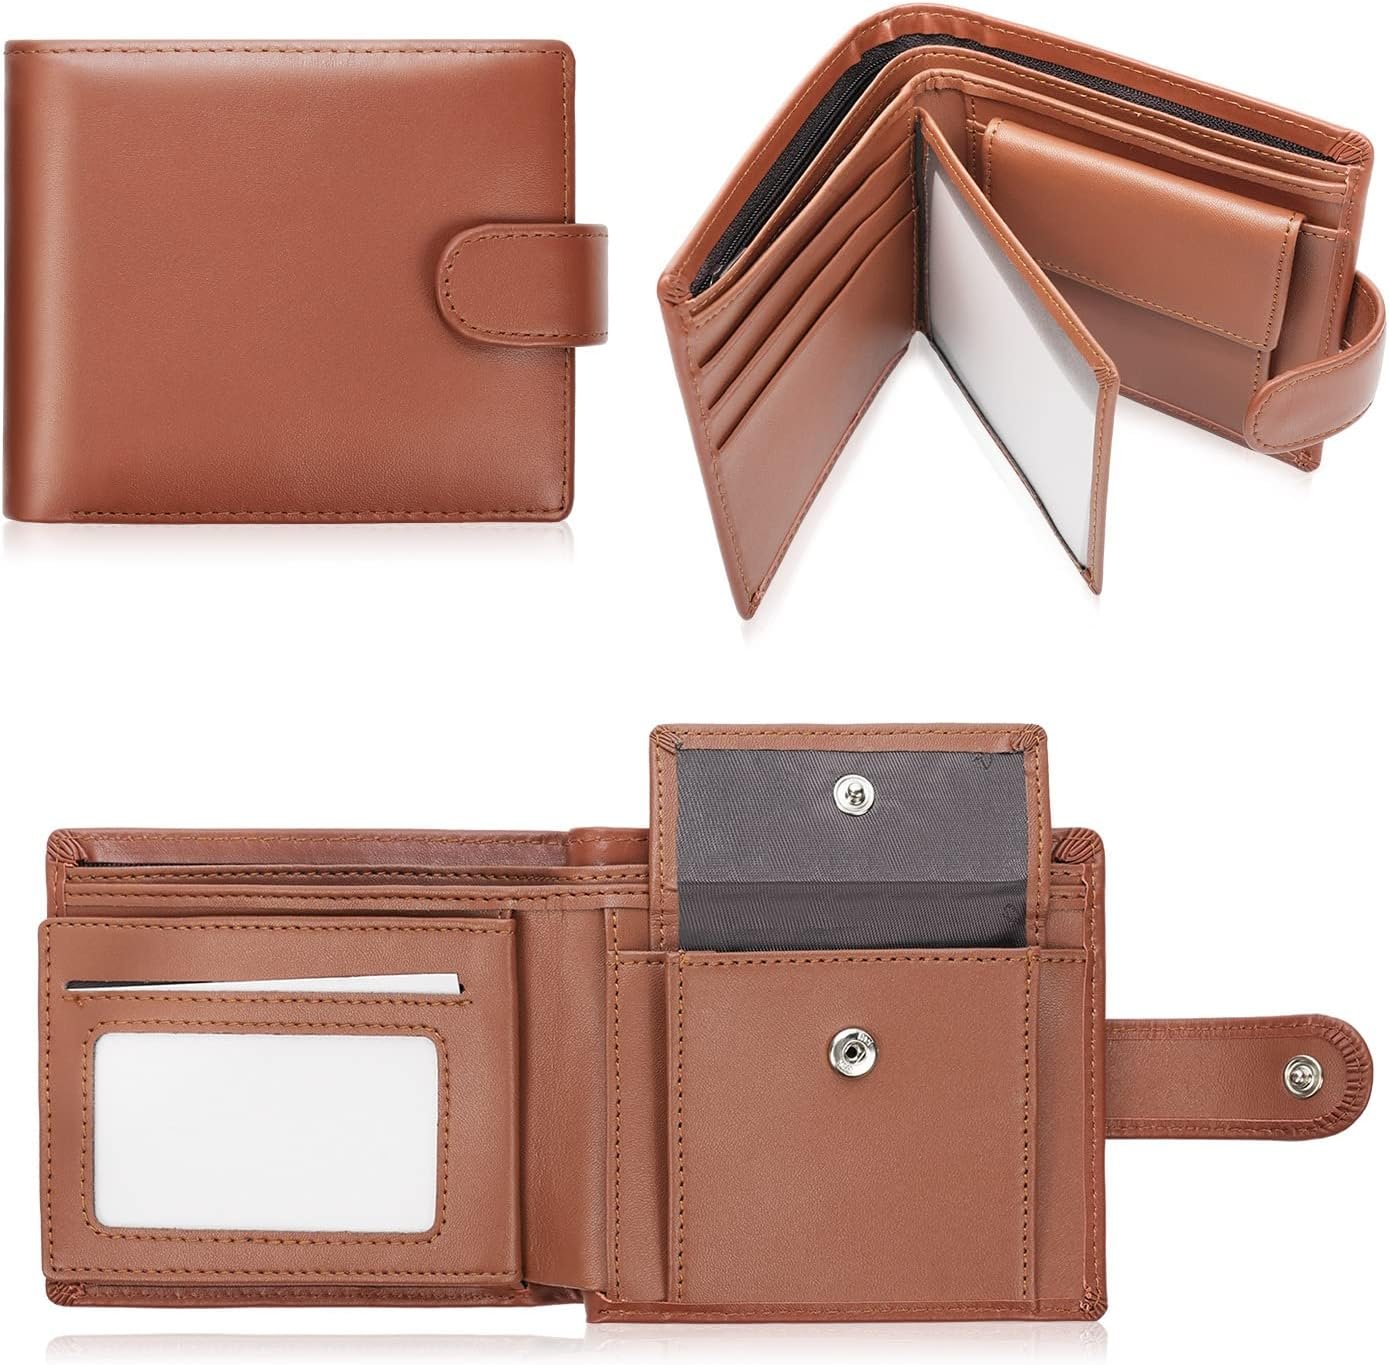 LifeImpree Genuine Leather Wallet Review